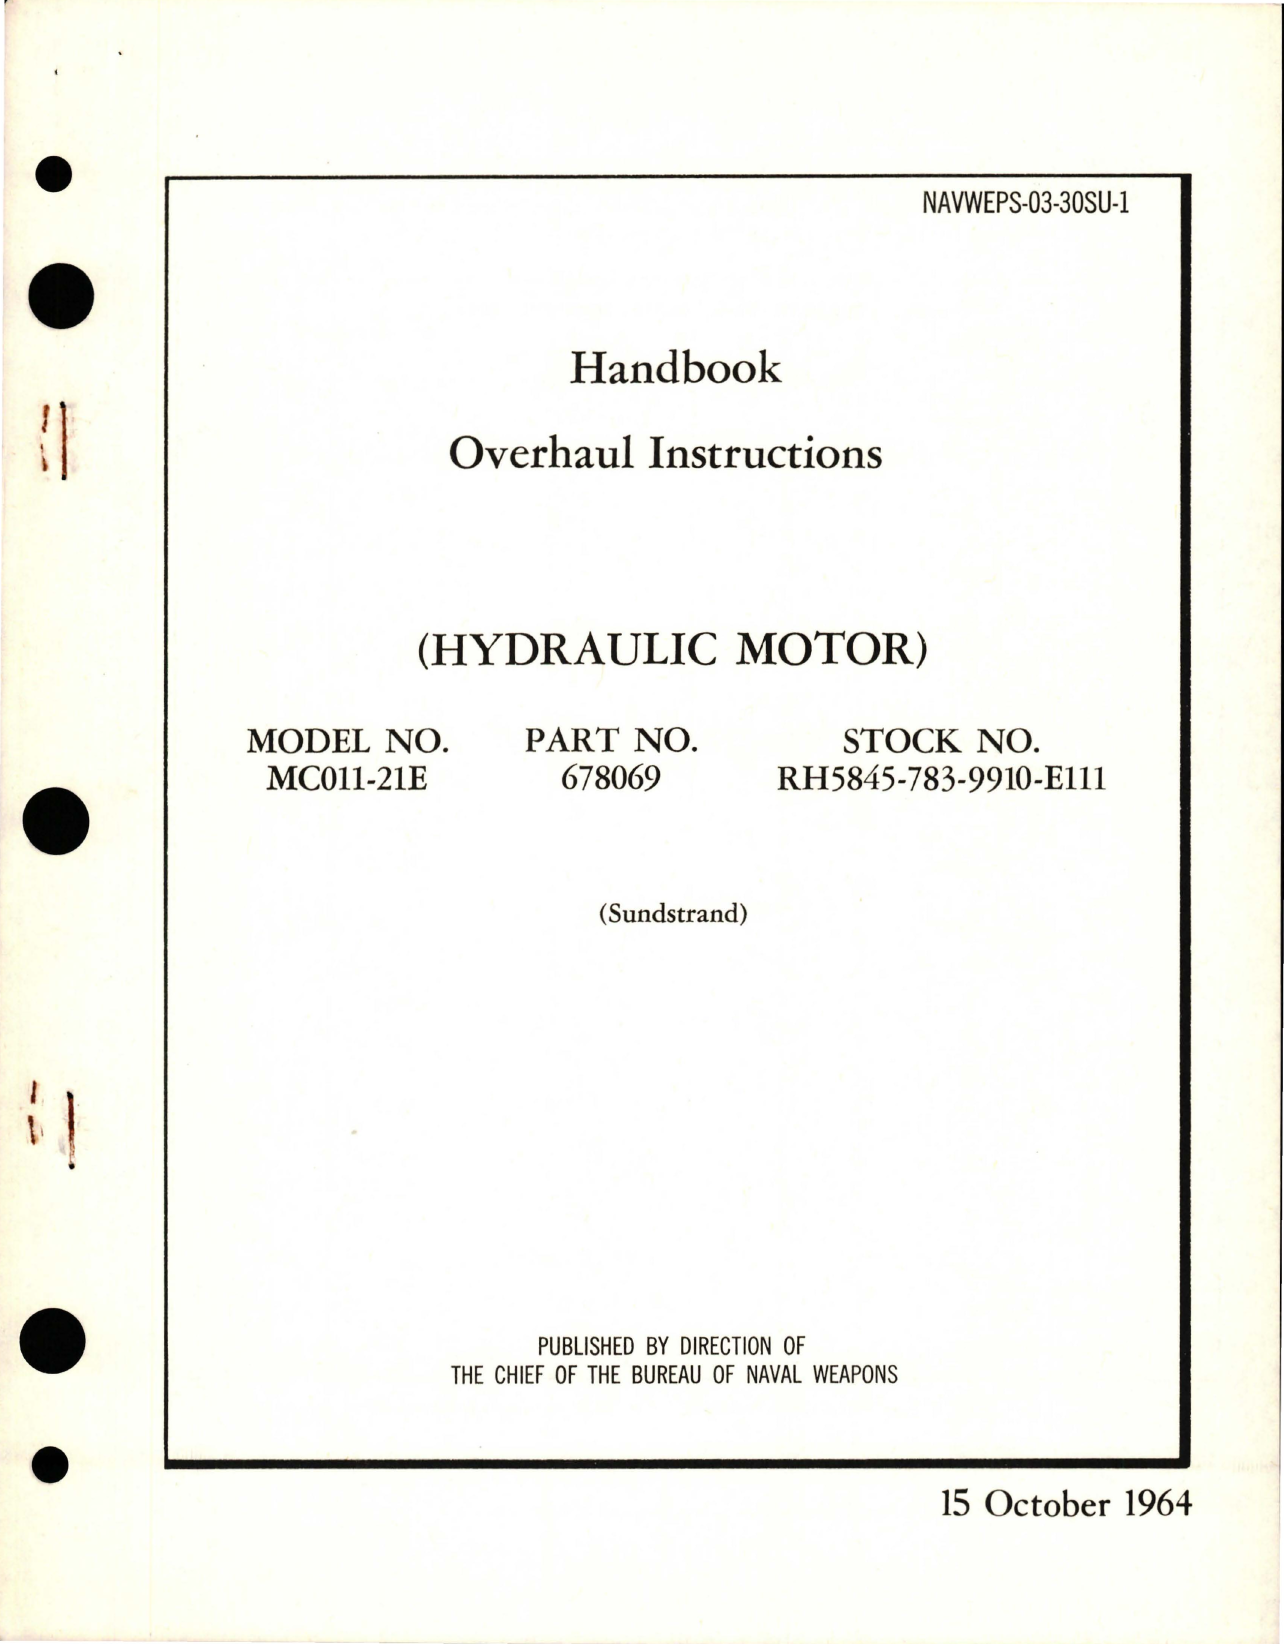 Sample page 1 from AirCorps Library document: Overhaul Instructions for Hydraulic Motor - Model MC011-21E - Part 678069